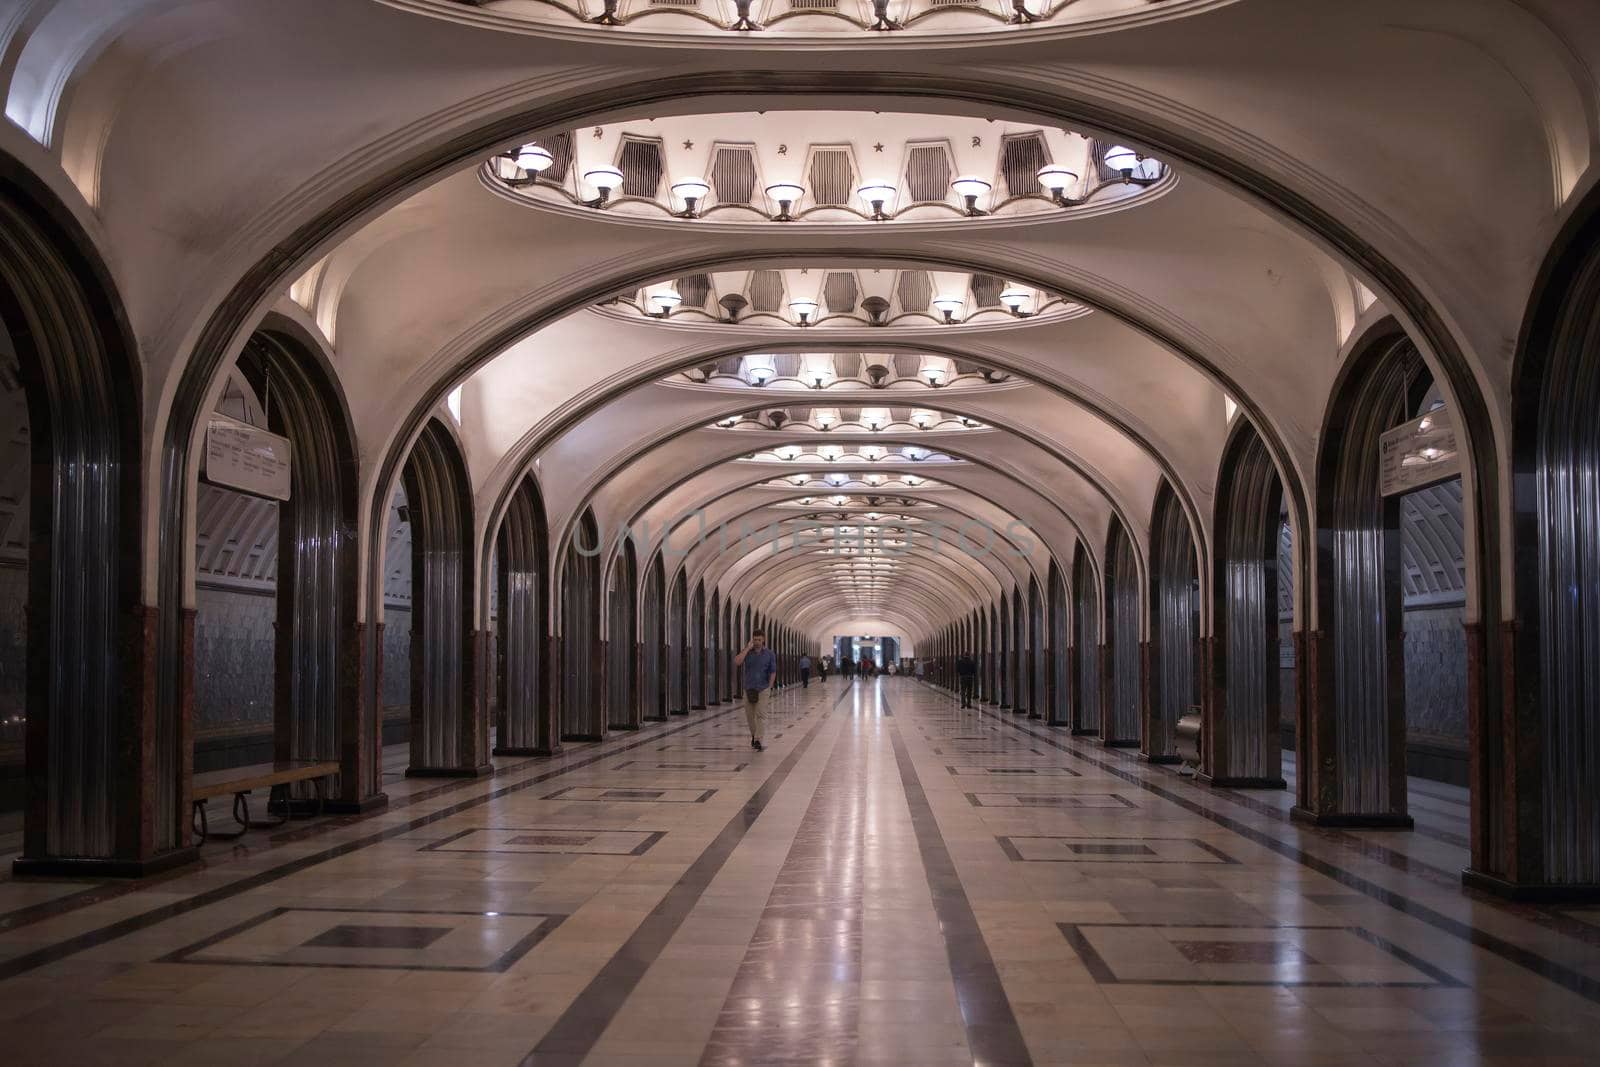 The lobby of the Mayakovskaya station with arches and mosaic ceilings. Stalinist Empire by elenarostunova